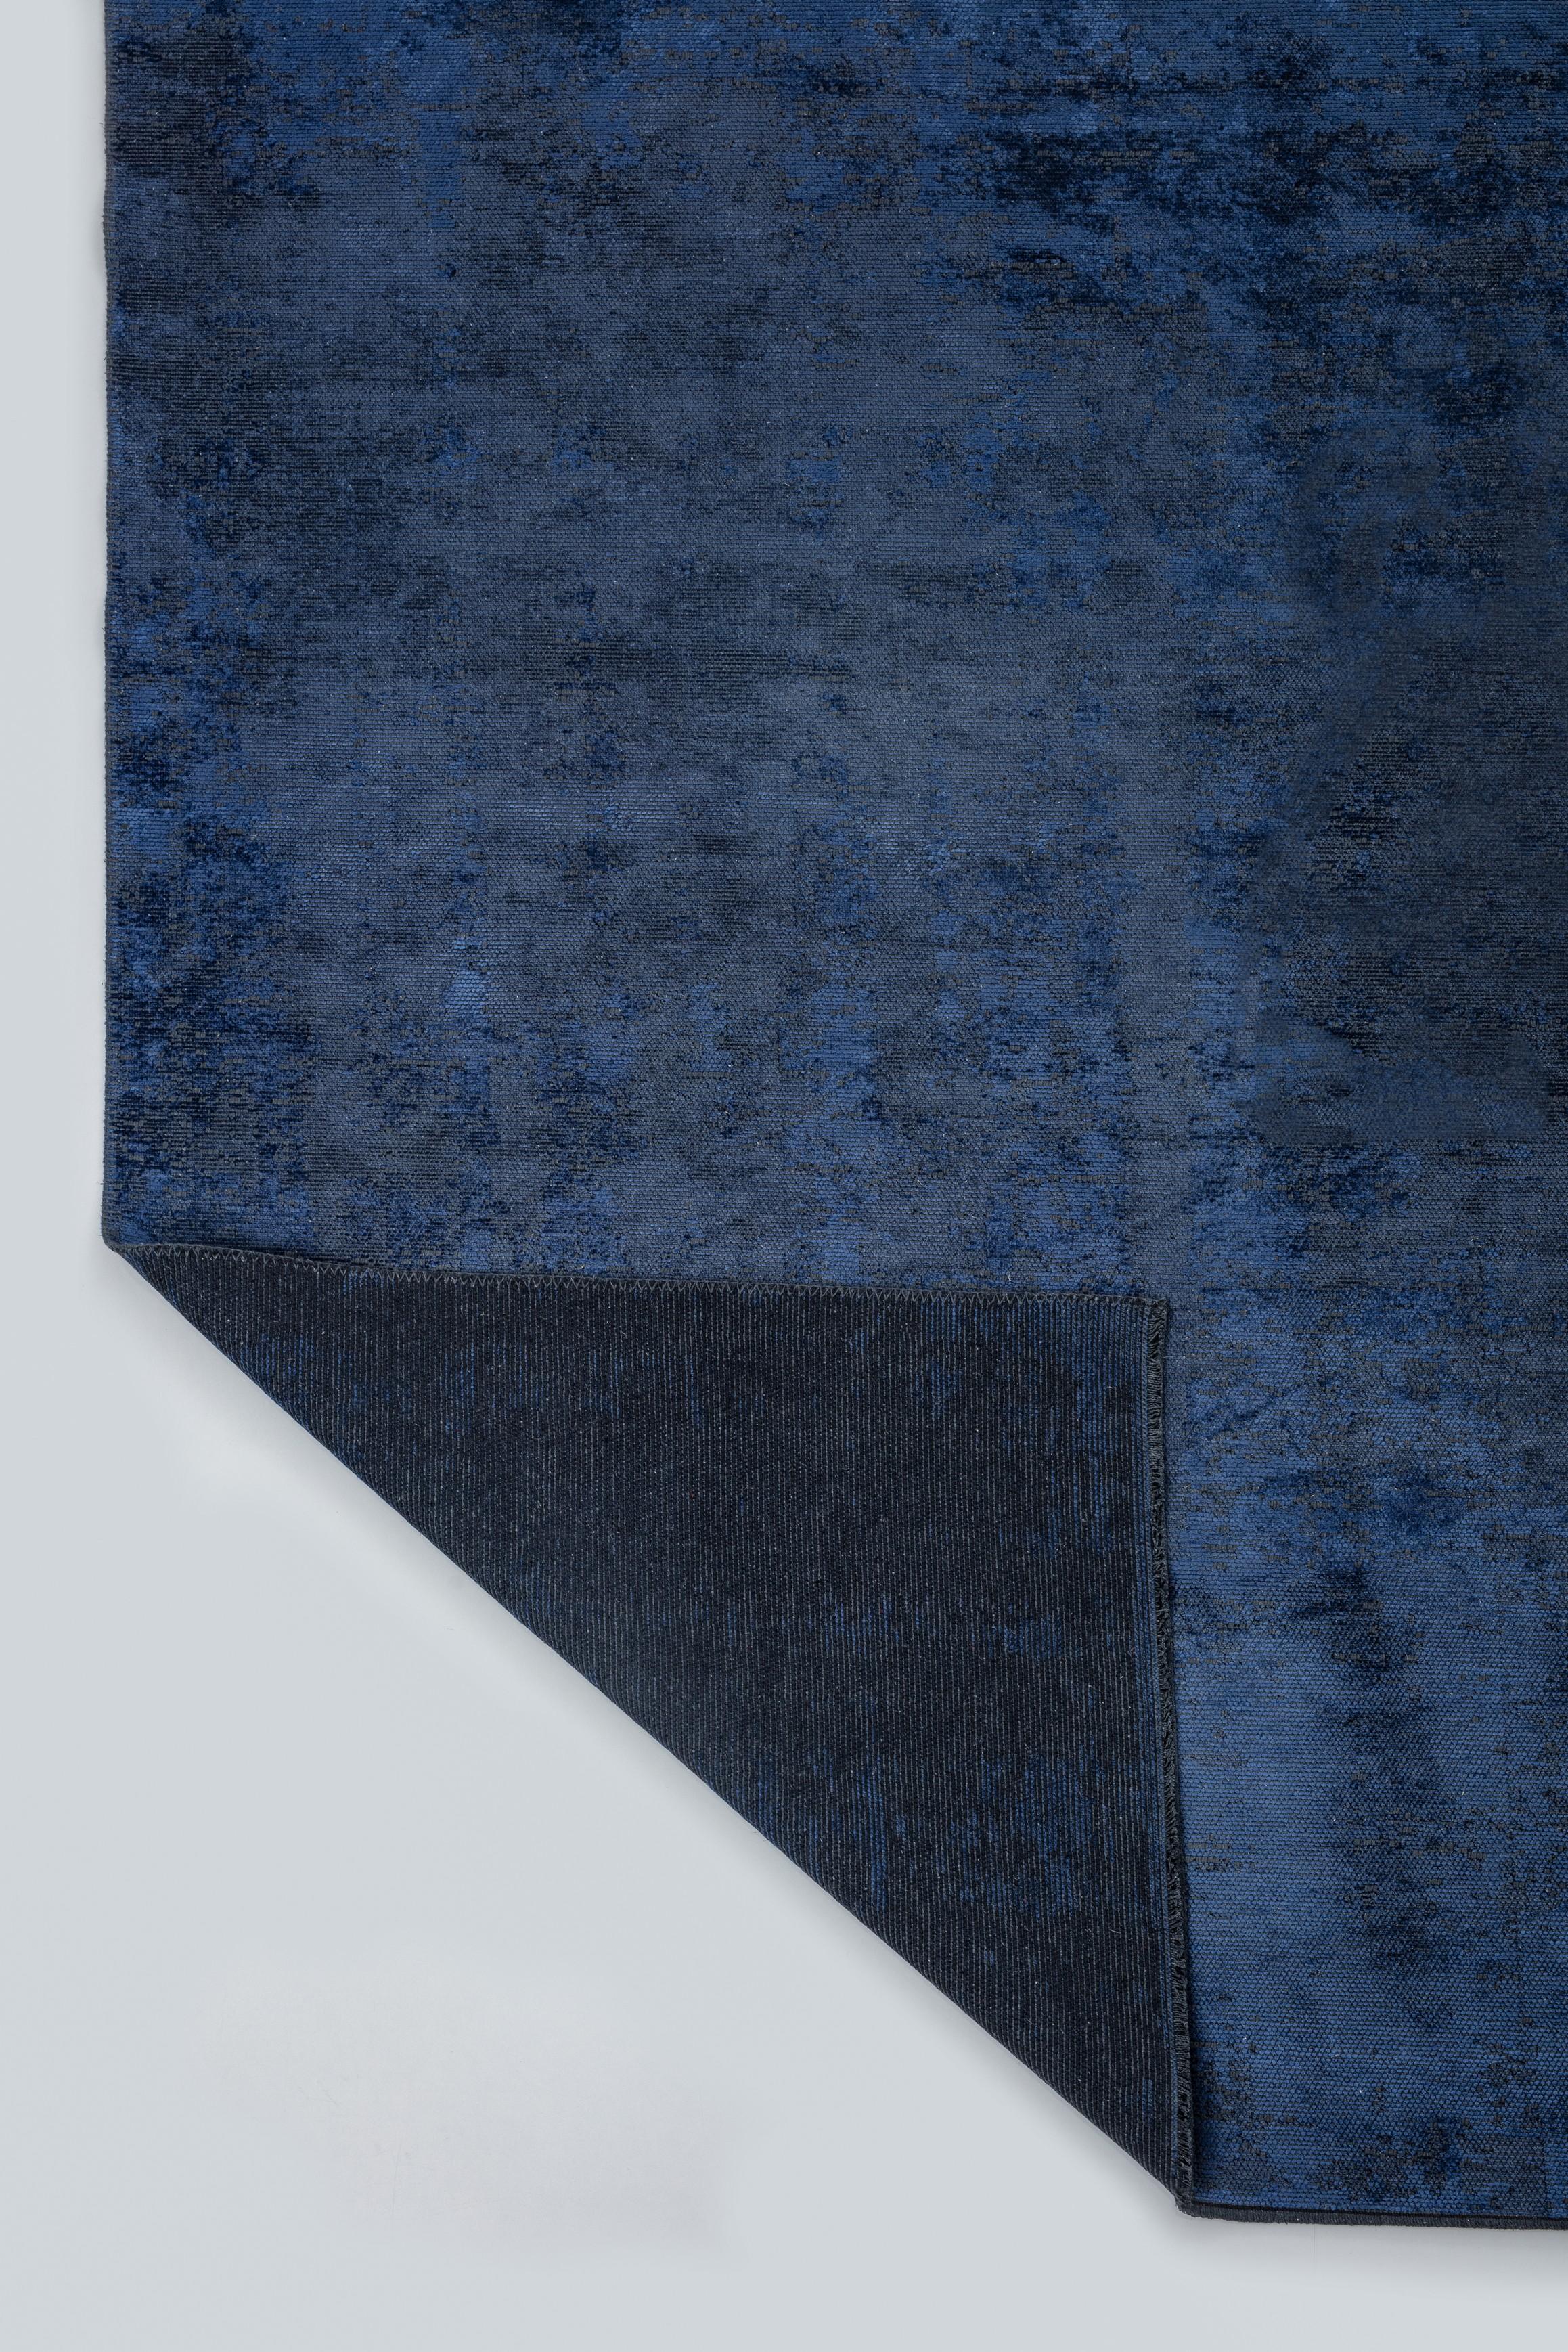 For Sale:  (Blue) Modern  Abstract Luxury Hand-Finished Area Rug 3